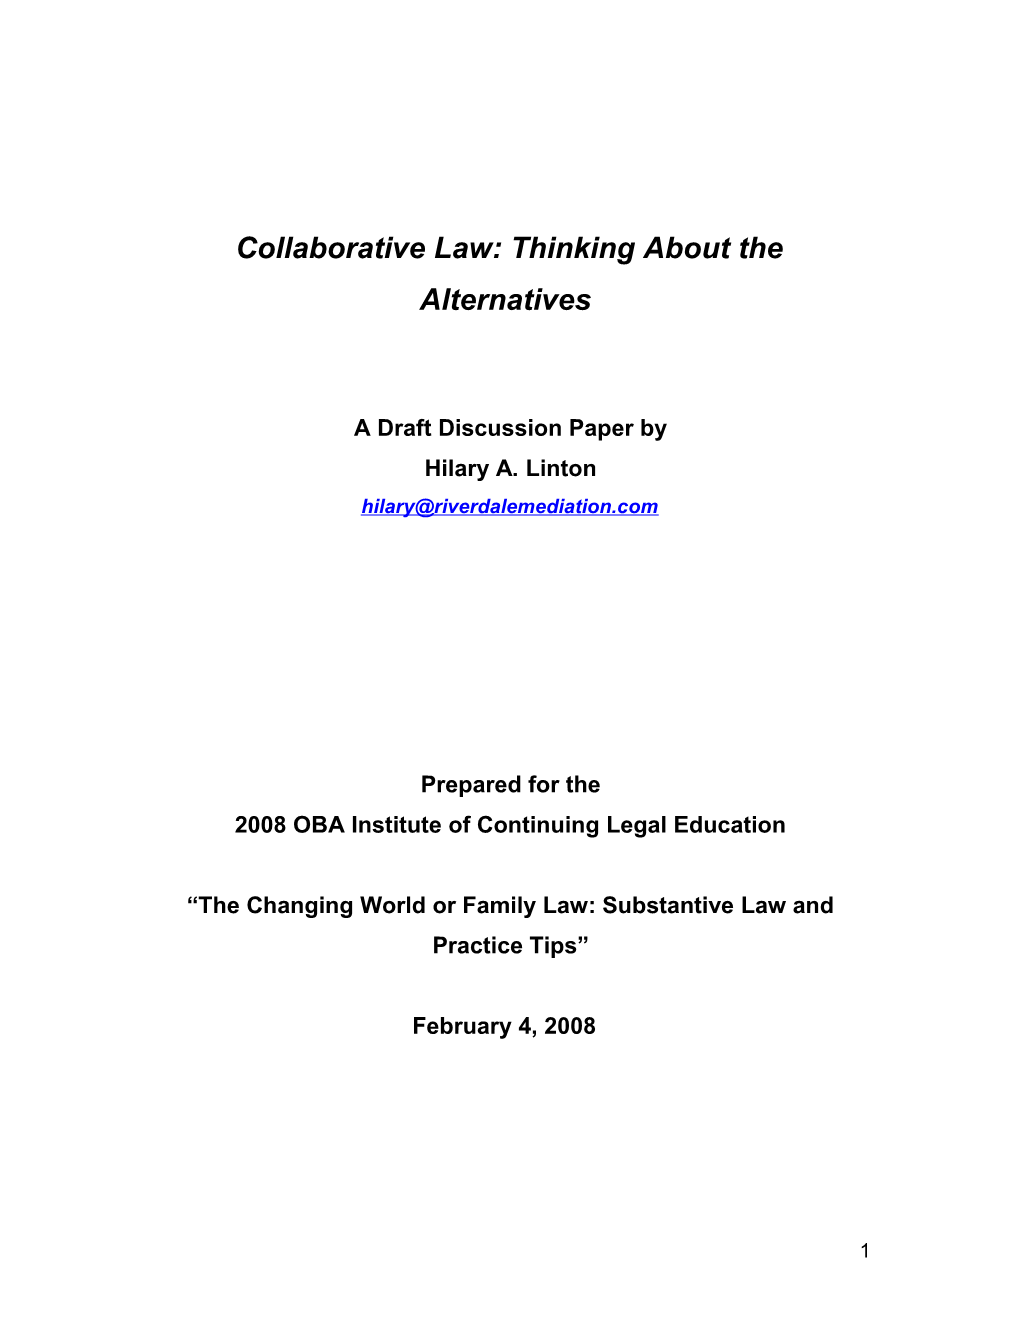 Collaborative Law: Thinking About the Alternatives